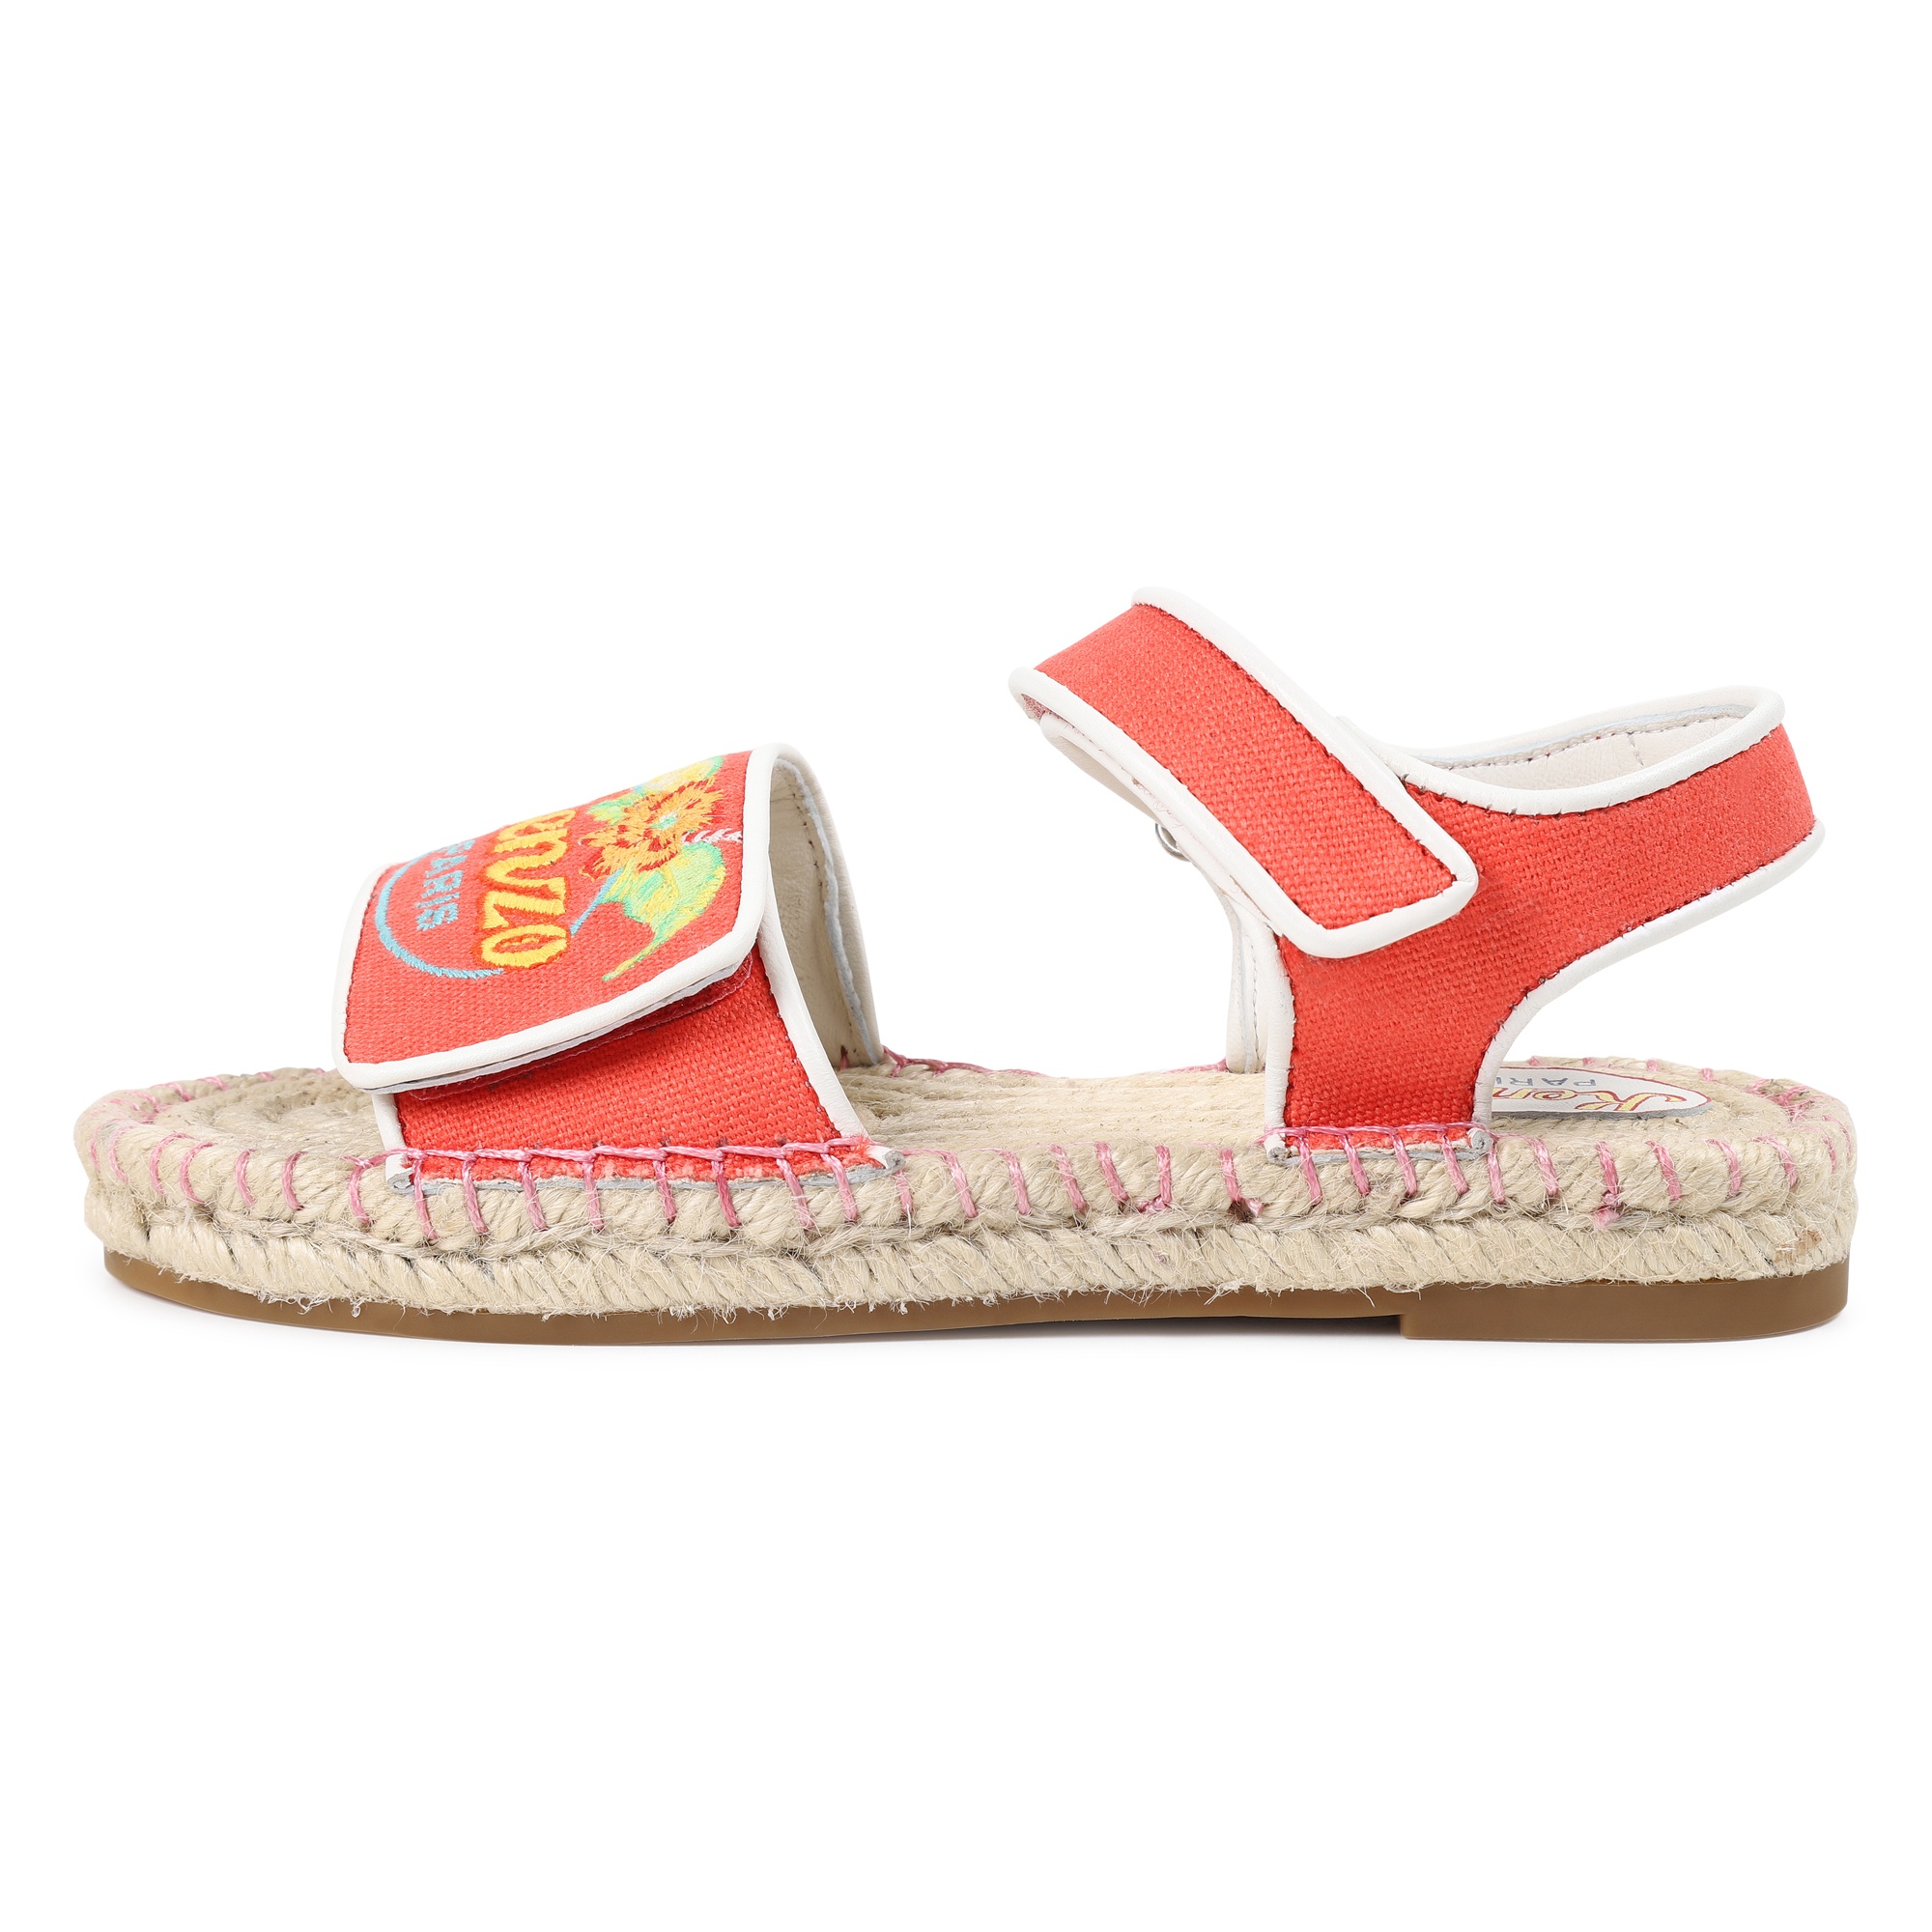 Cotton sandals KENZO KIDS for GIRL